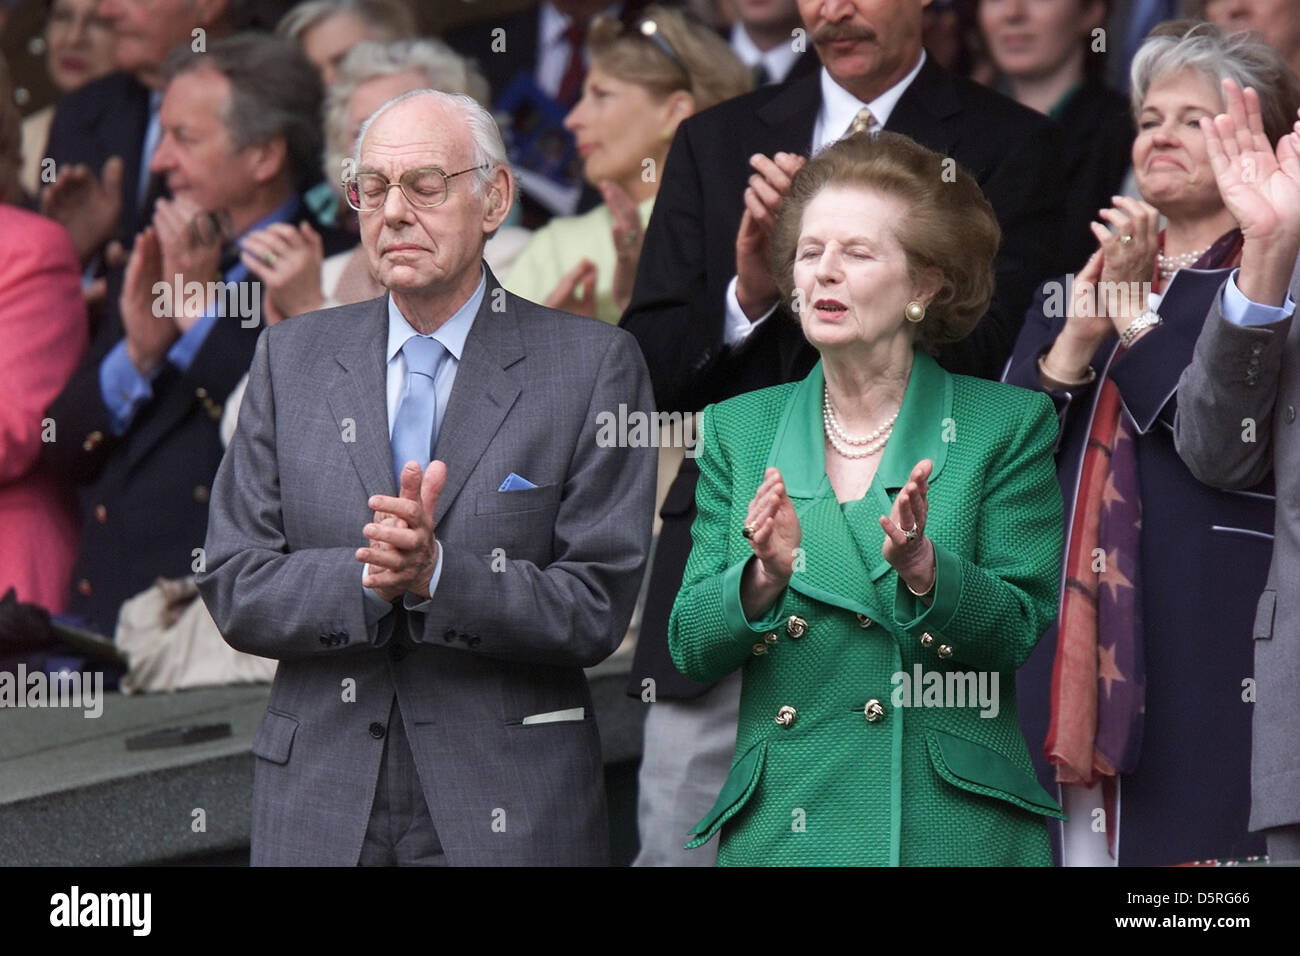 Archive: Margaret Thatcher        1925-2013          Picture taken July 7, 2000           Former Prime Minister Margaret (Maggie) Thatcher and Husband Dennis at the Wimbledon Tennis Ladies Final. Pic: Paul Marriott Photography/Alamy Live News Stock Photo